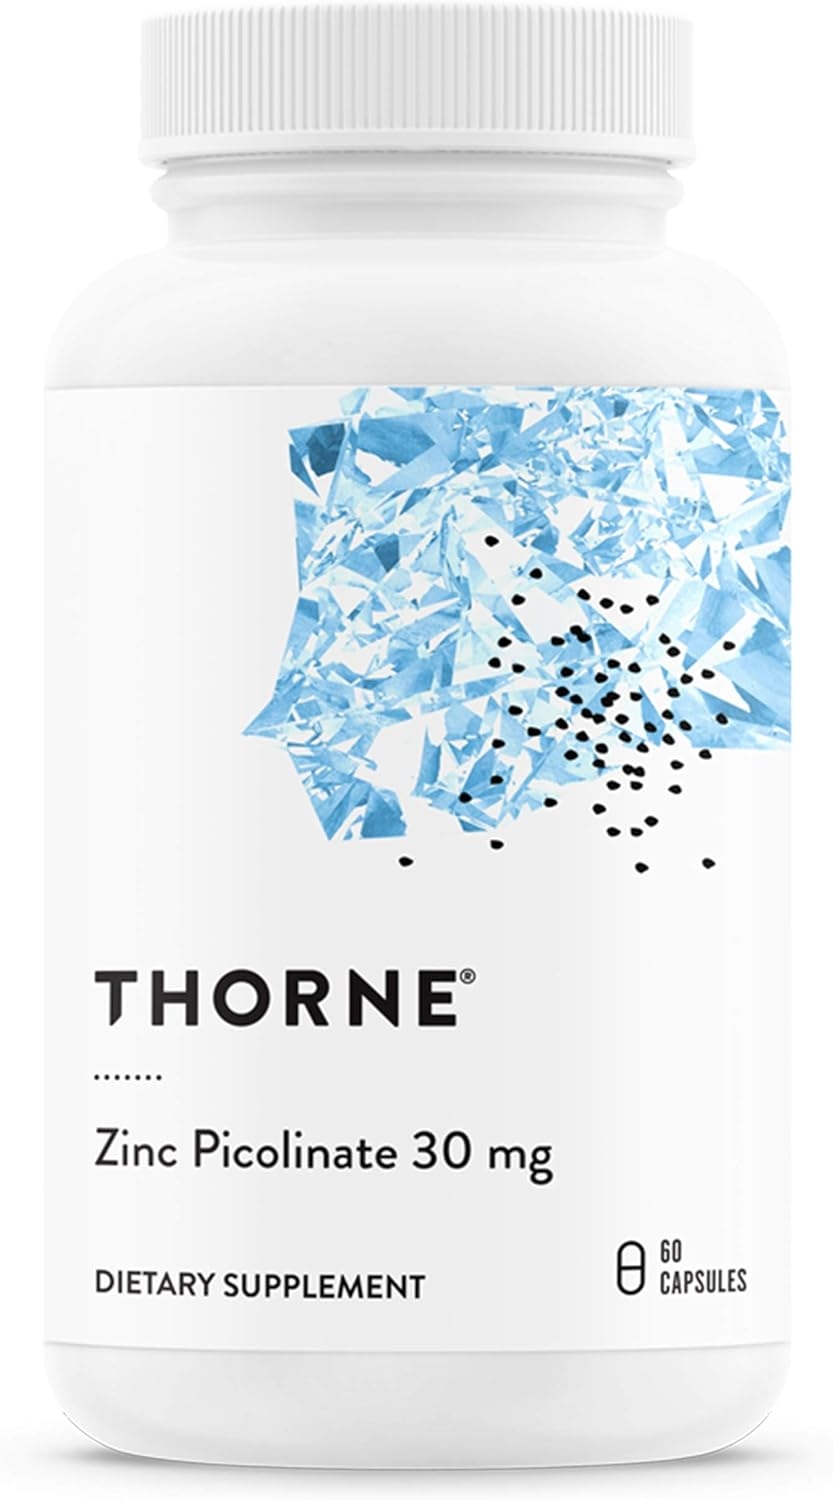 Thorne Research - Zinc Picolinate 30 mg - Well-Absorbed Zinc Supplement for Growth and Immune Function - 60 Capsules